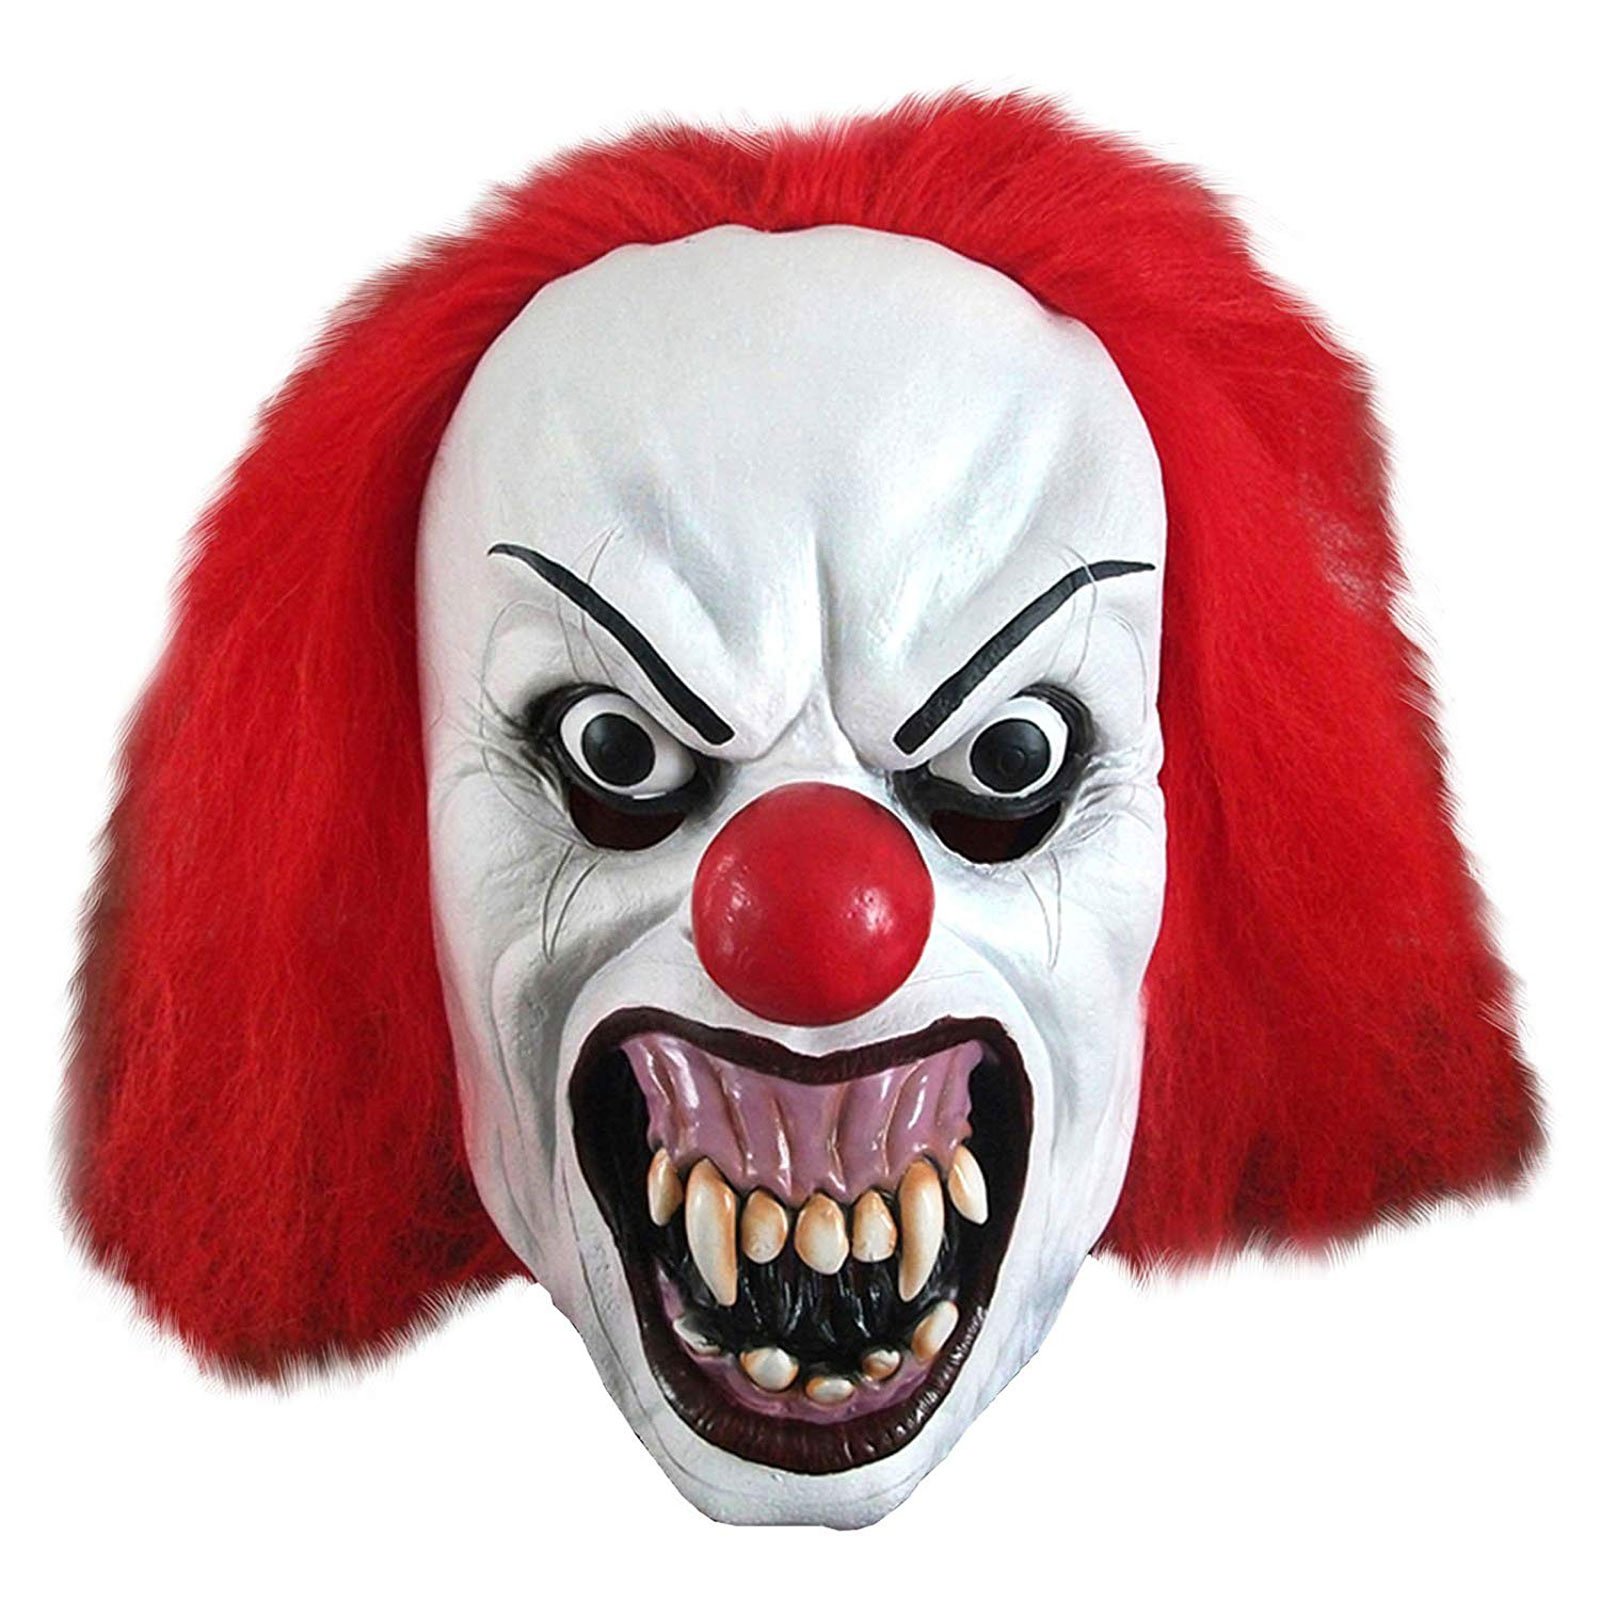 ACCESSORIES/HALLOWEEN/MASKS/PENNYWISE SNARLING TERROR CLOWN MASK WITH HAIR